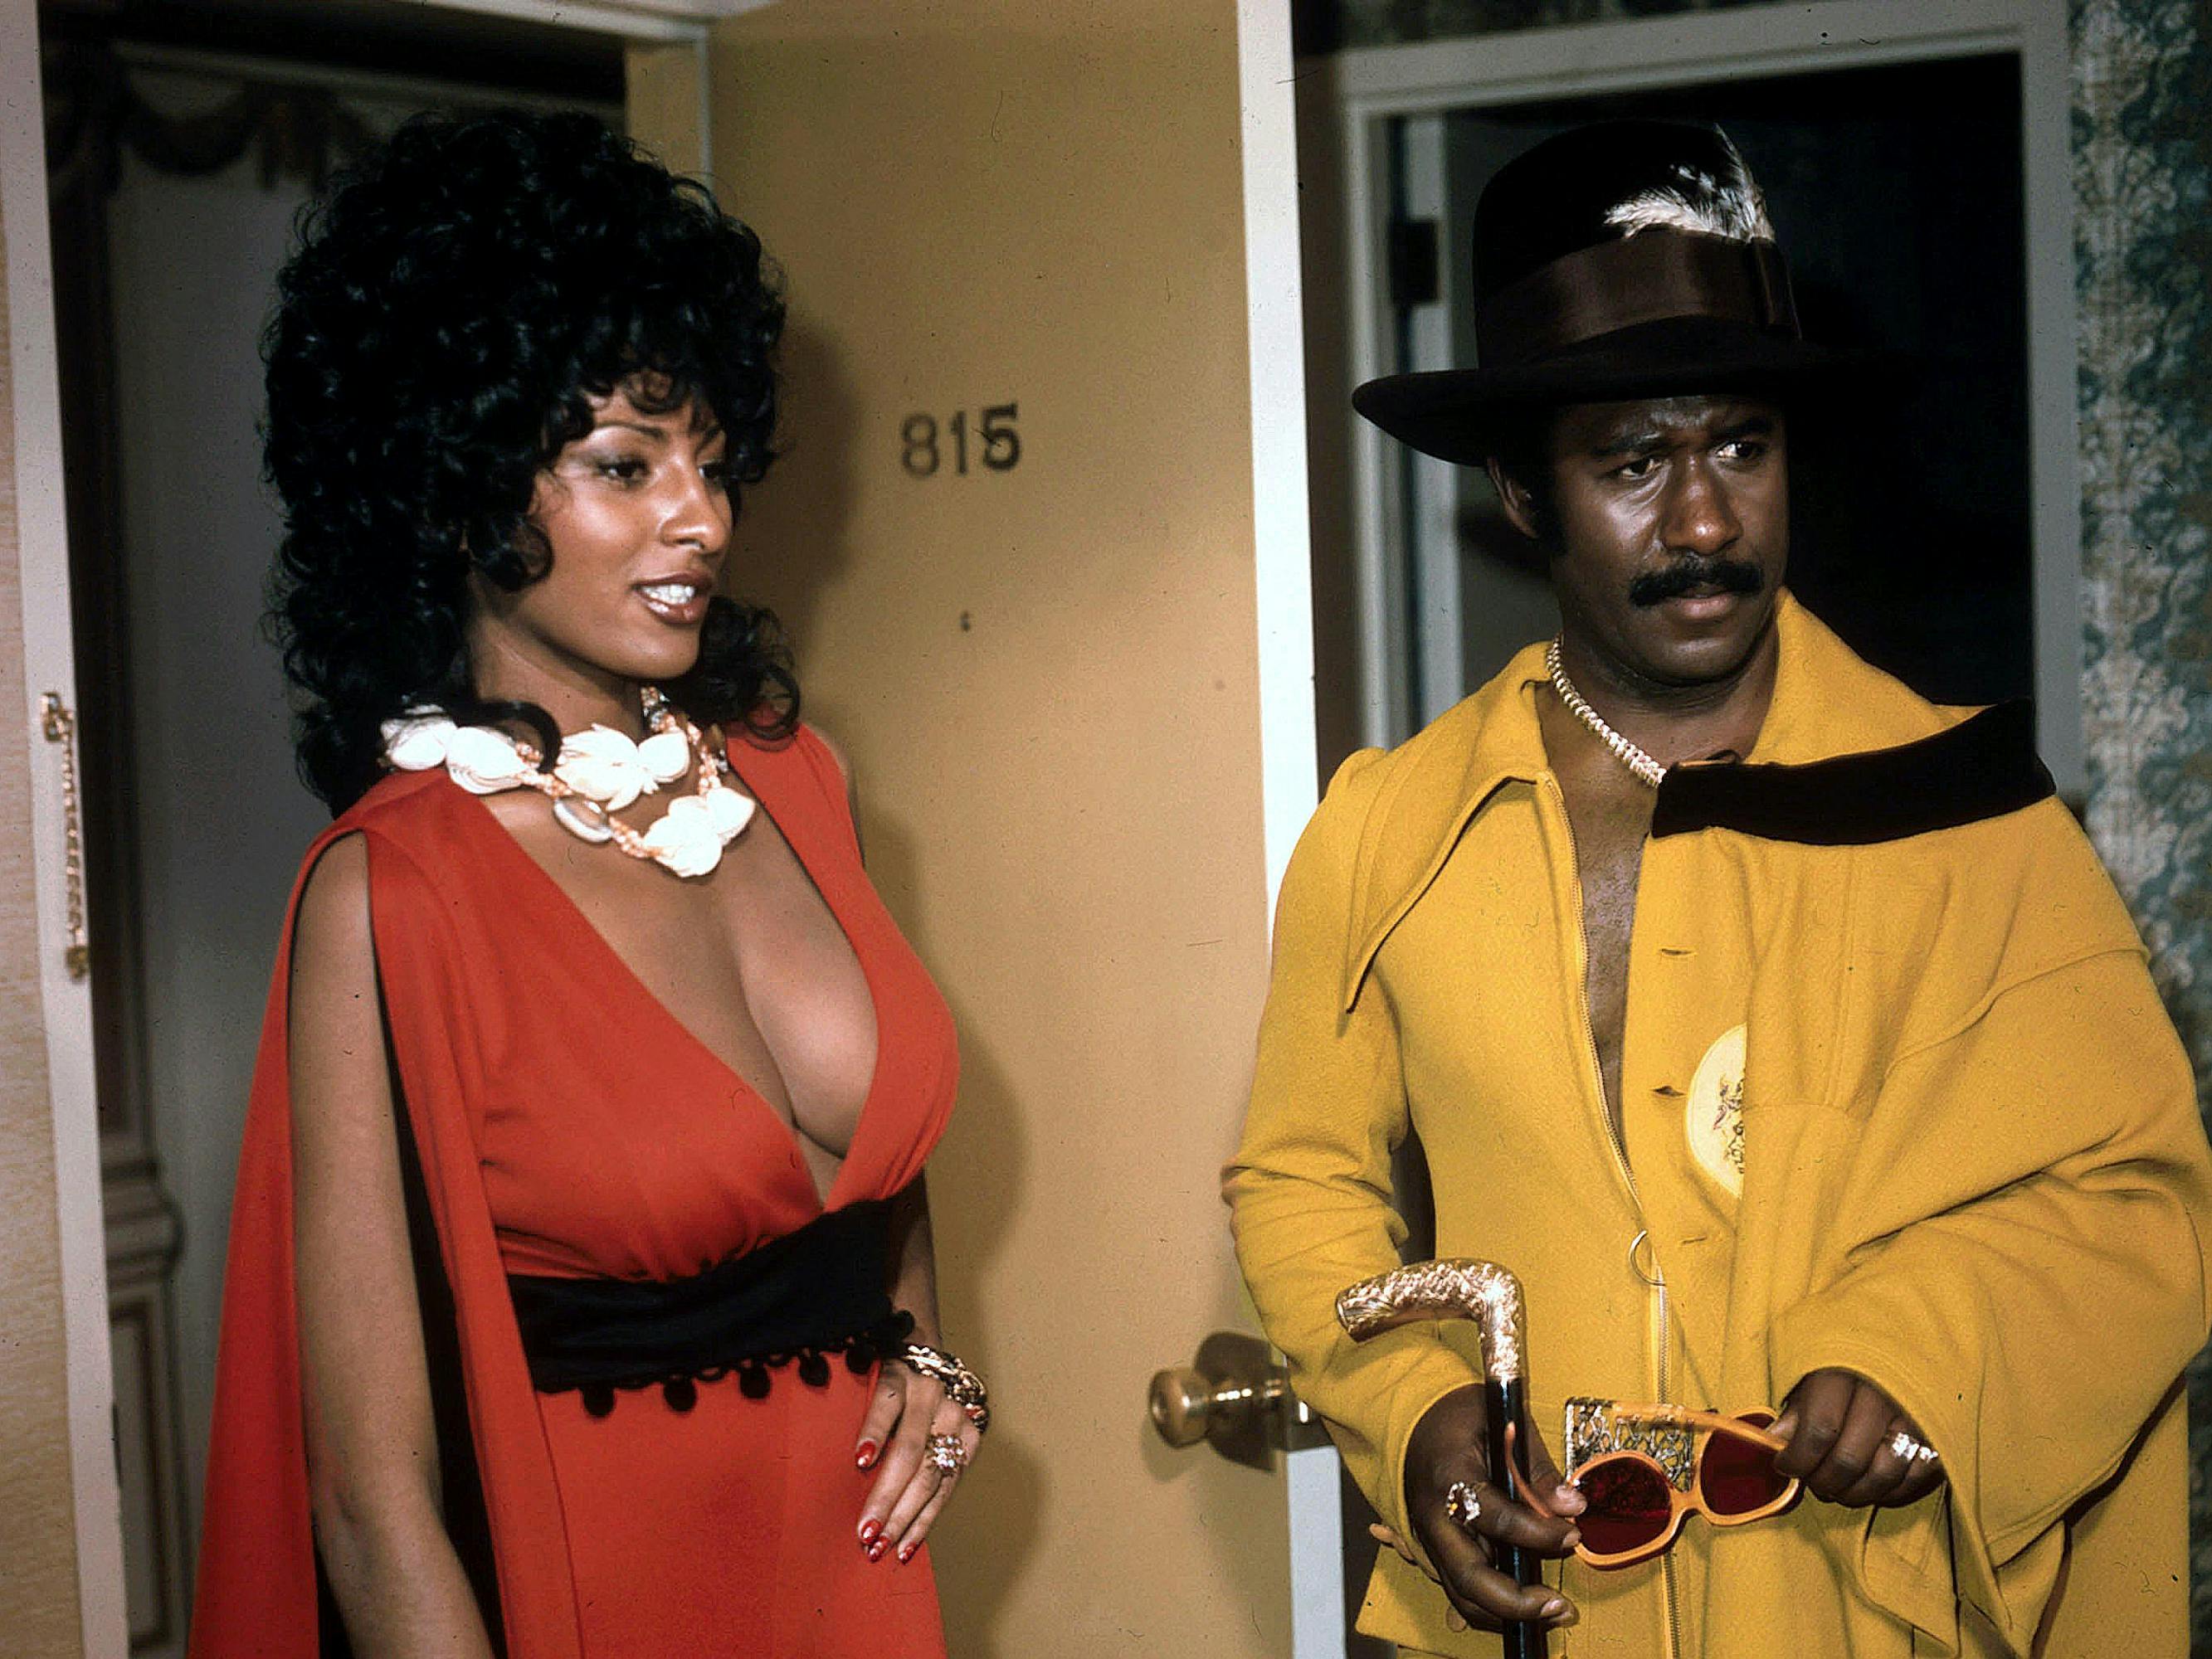 Coffy (Pam Grier) and King George (Robert DoQui) stand together in red andy yellow respectively.